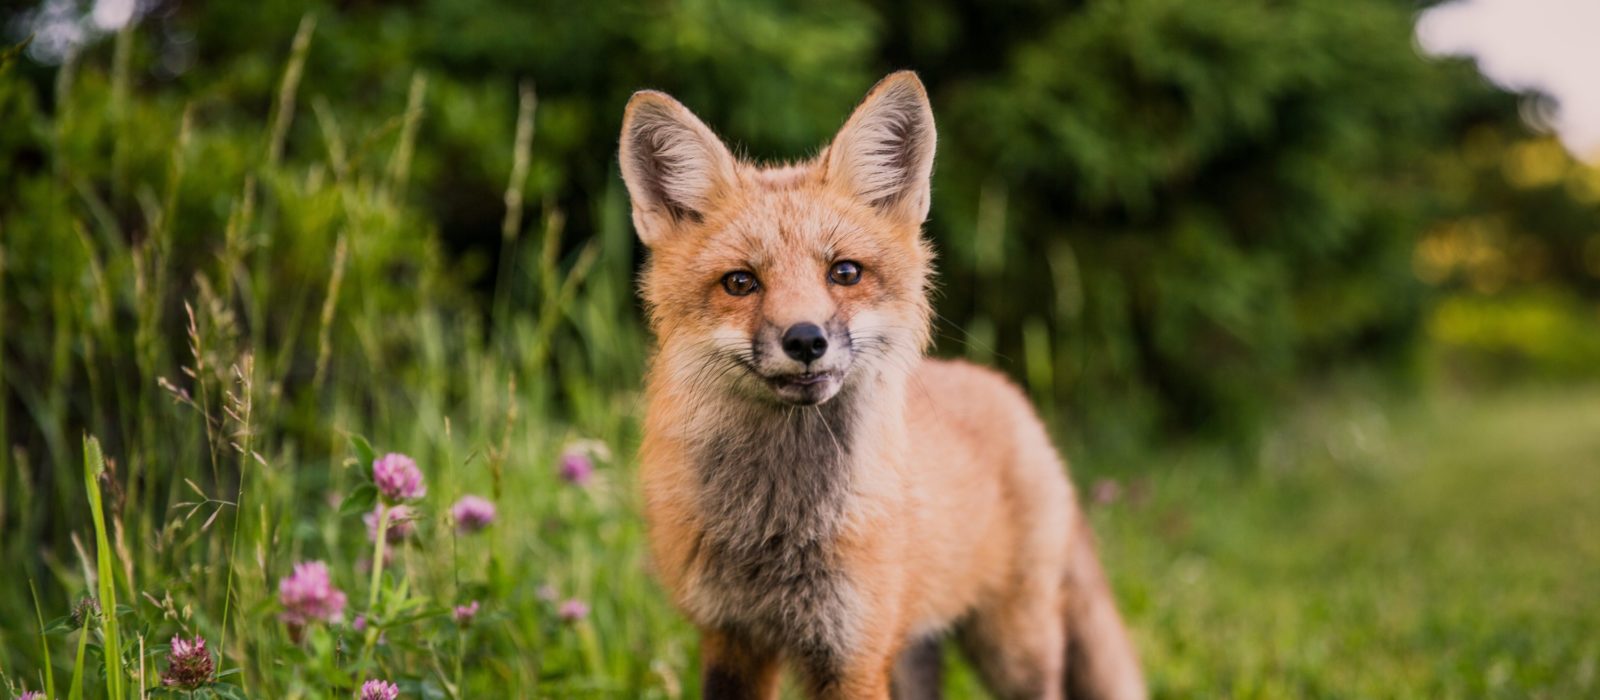 A red fox standing in a grassy meadow. 